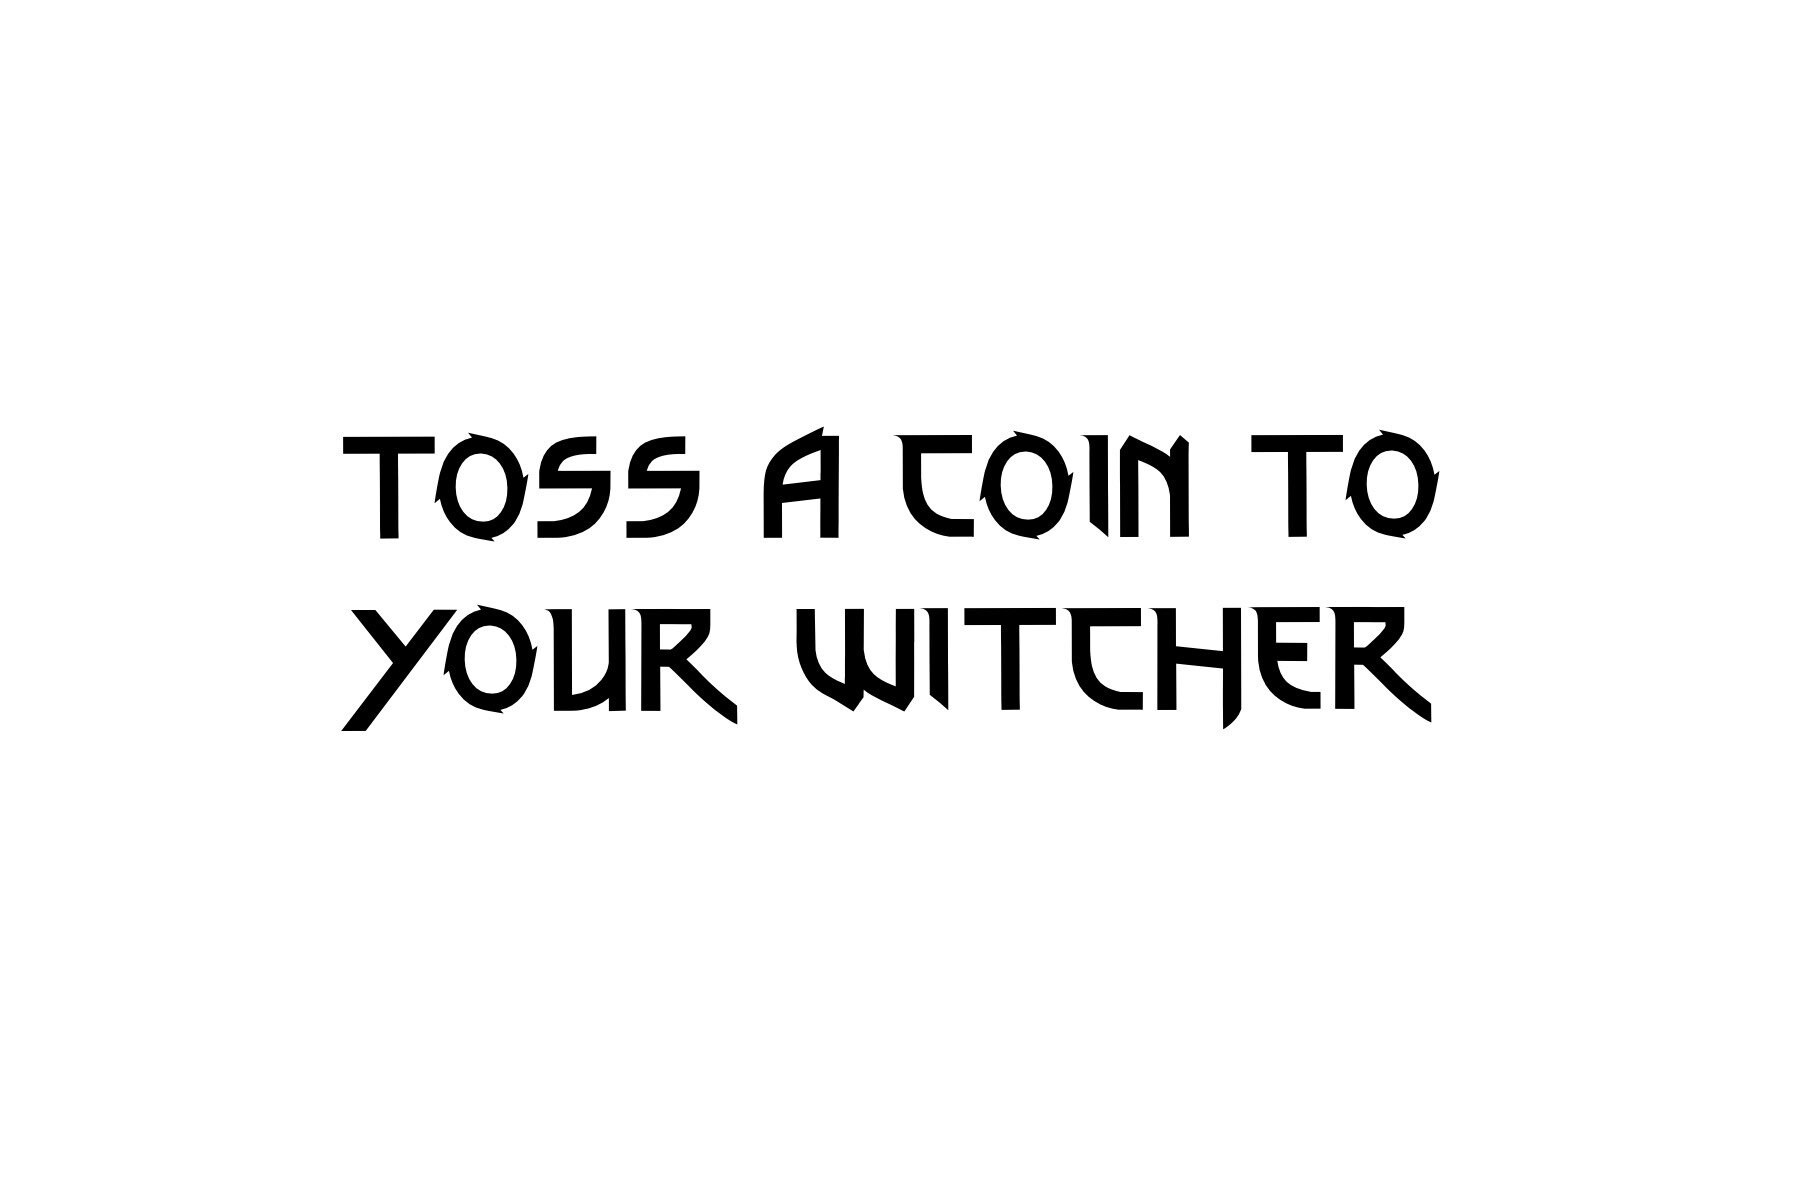 The Witcher Toss A Coin To Your Witcher Vinyl Sticker Decal